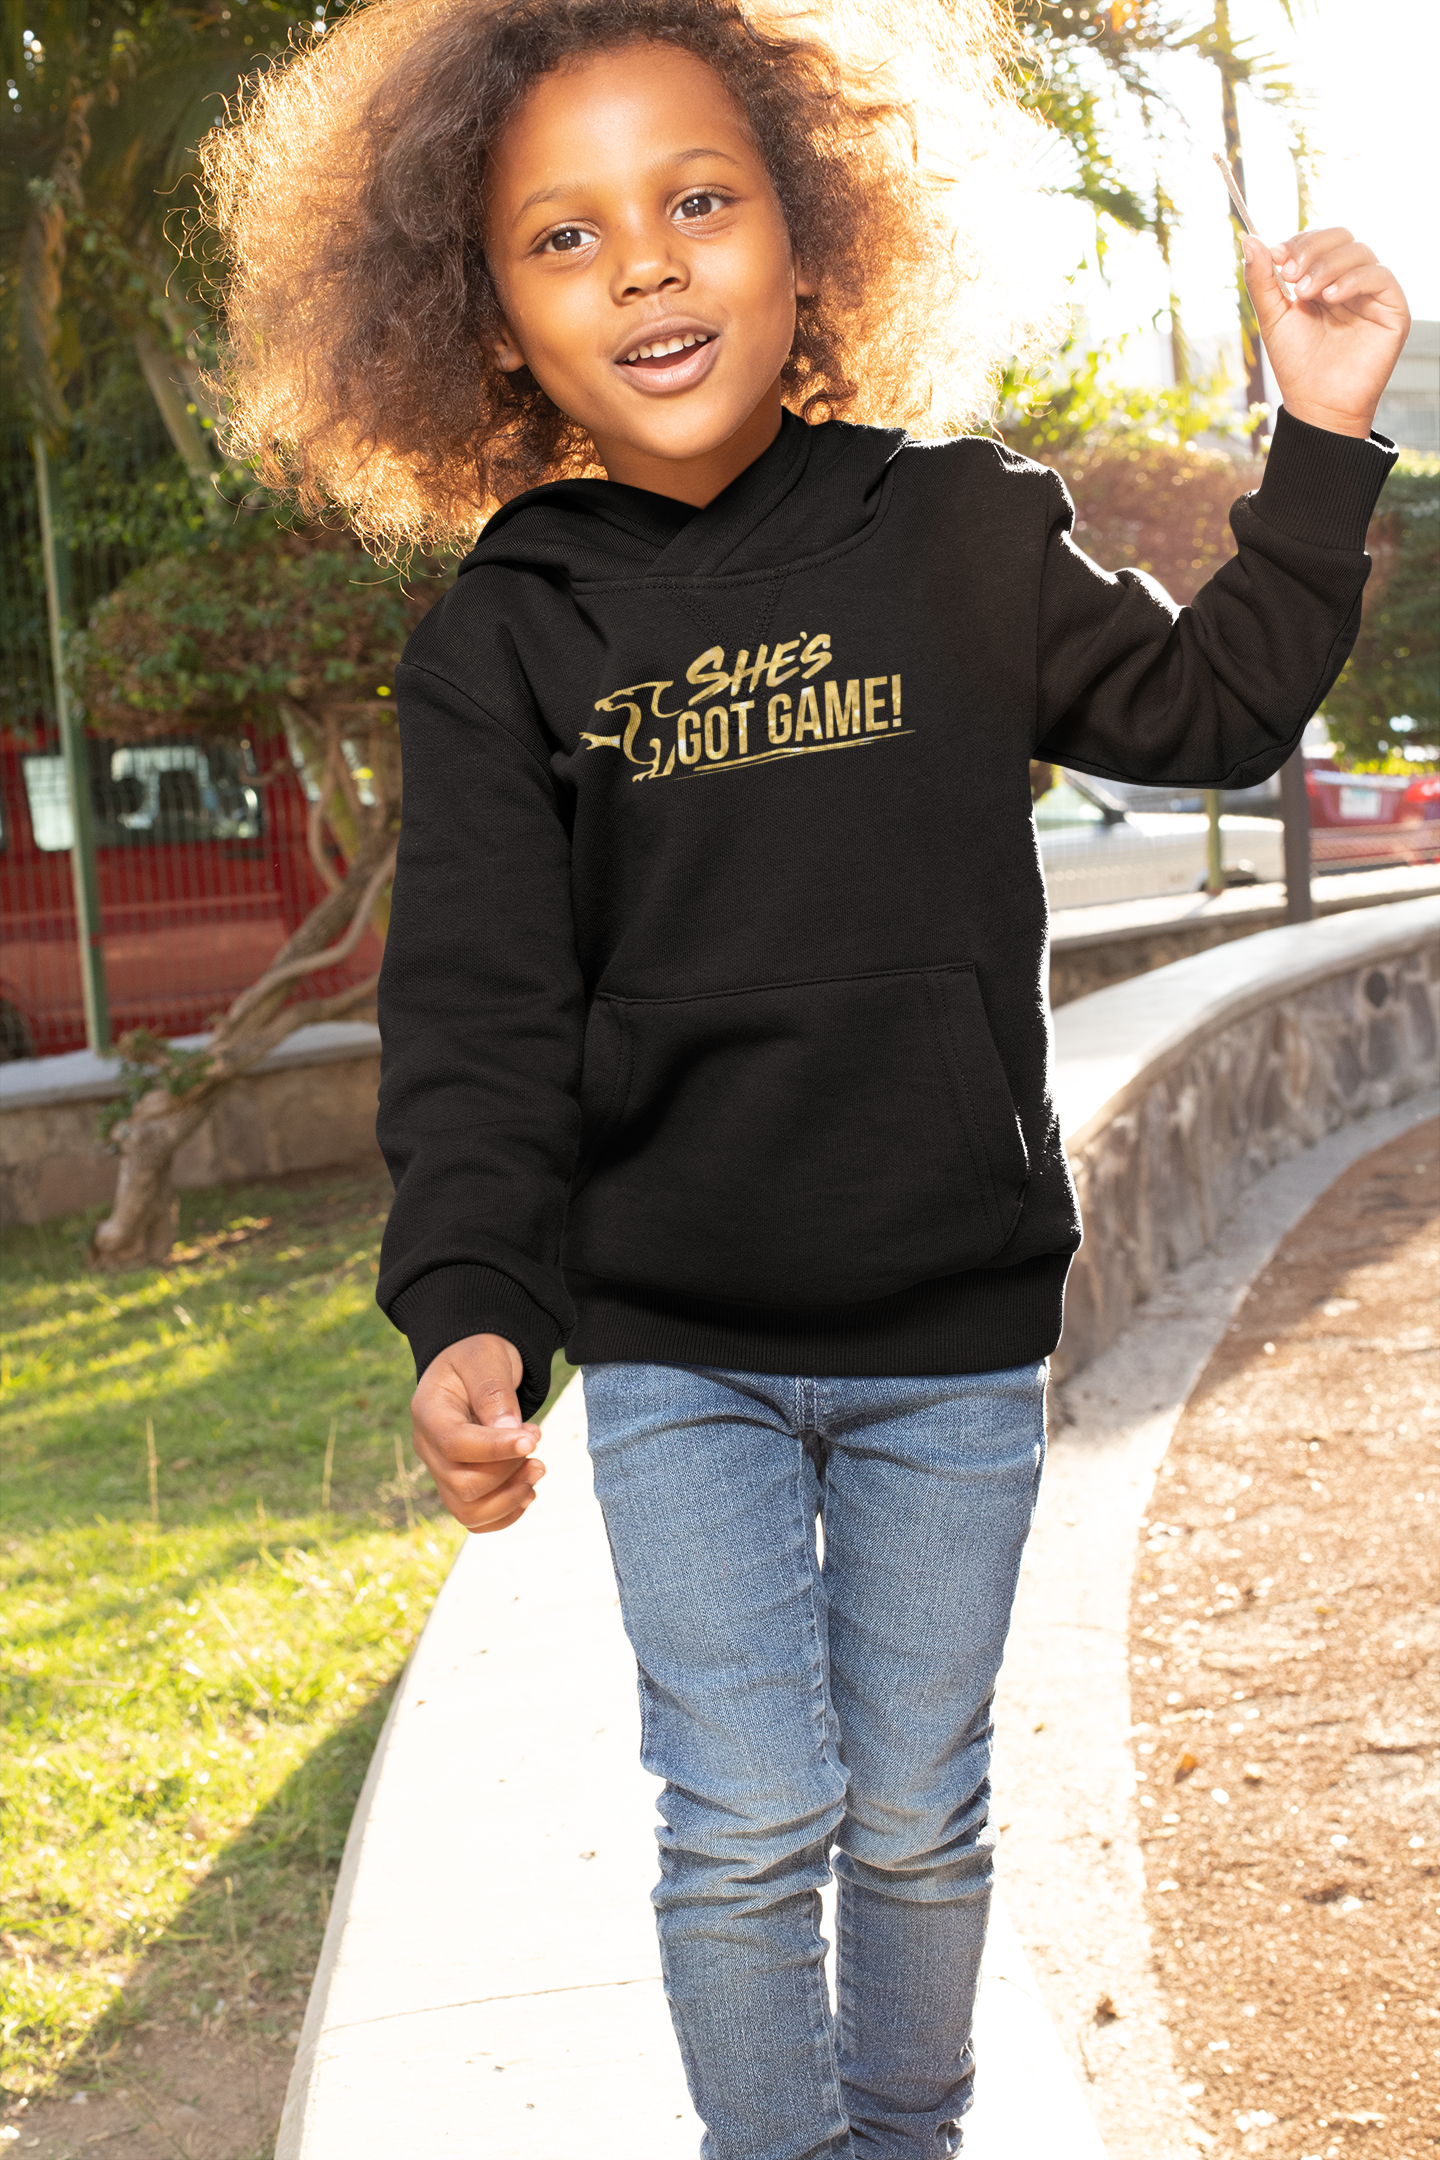 SGG - "She Can, She Will" Hoodie YOUTH